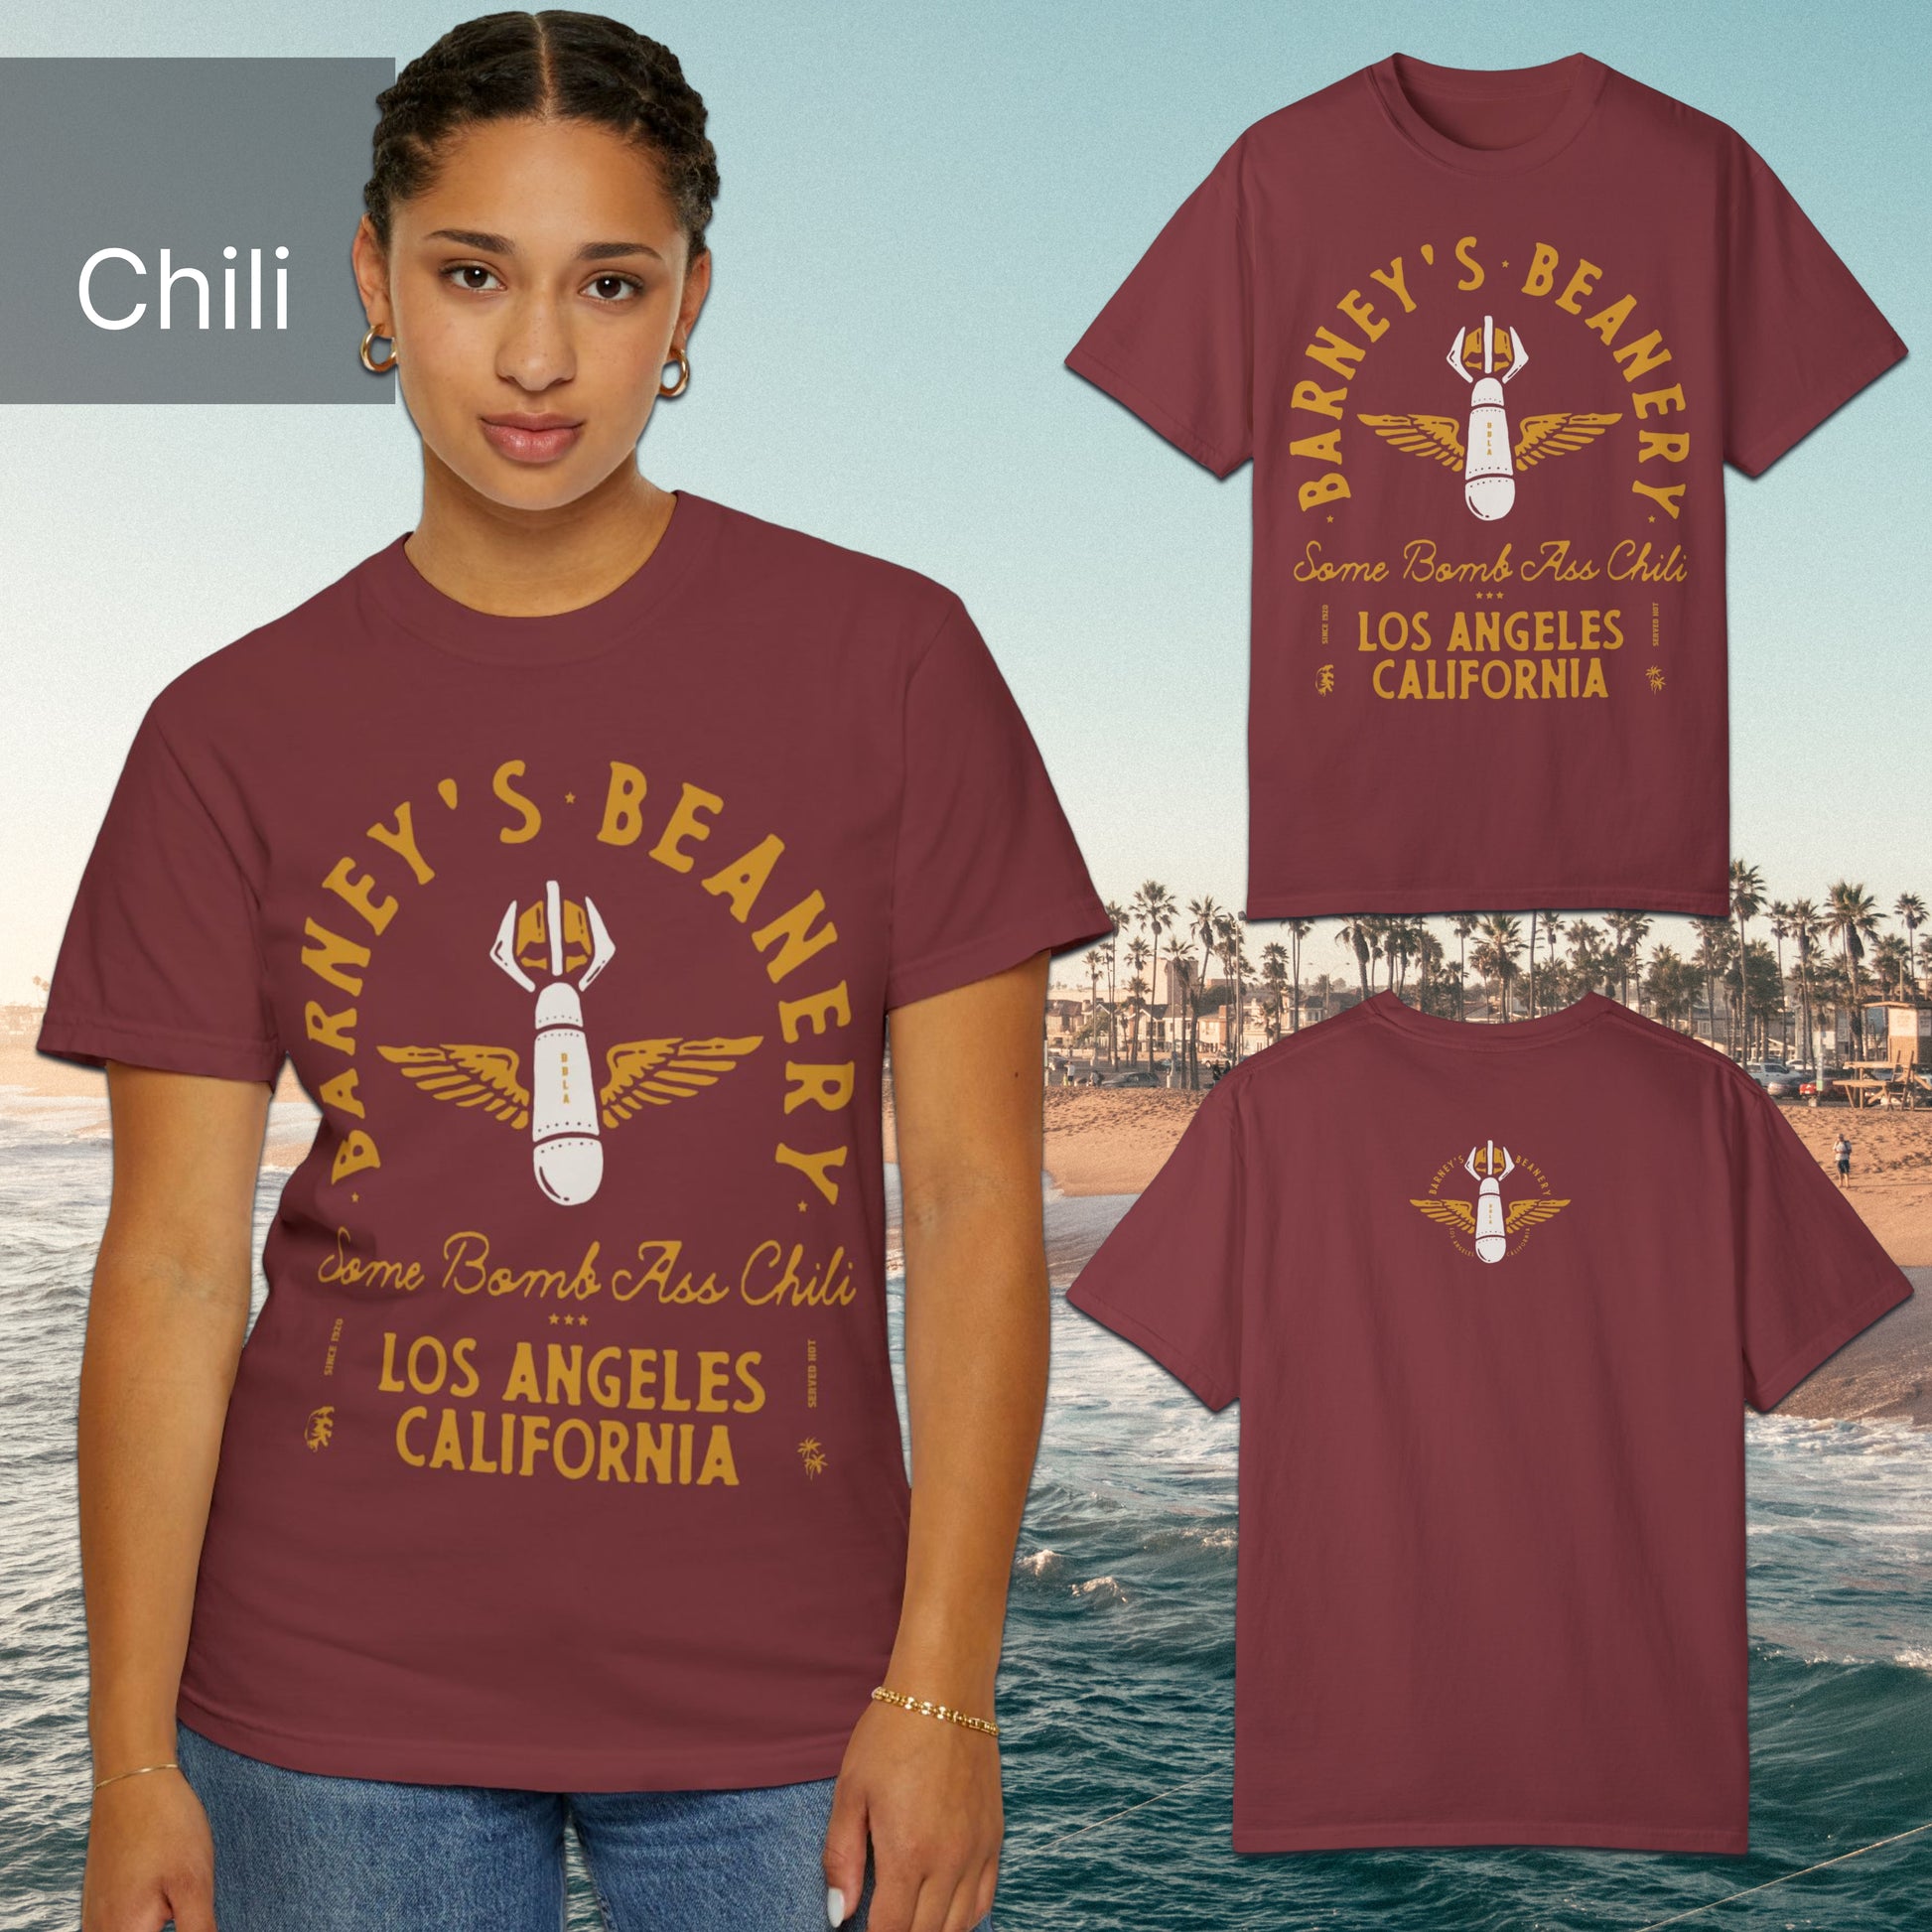 Some Bomb Ass Chili | BARNEY'S BEANERY - Women's Graphic Tee | Chili Comfort Colors 1717 T-Shirt - All Graphics On Front And Back Flat Lay View